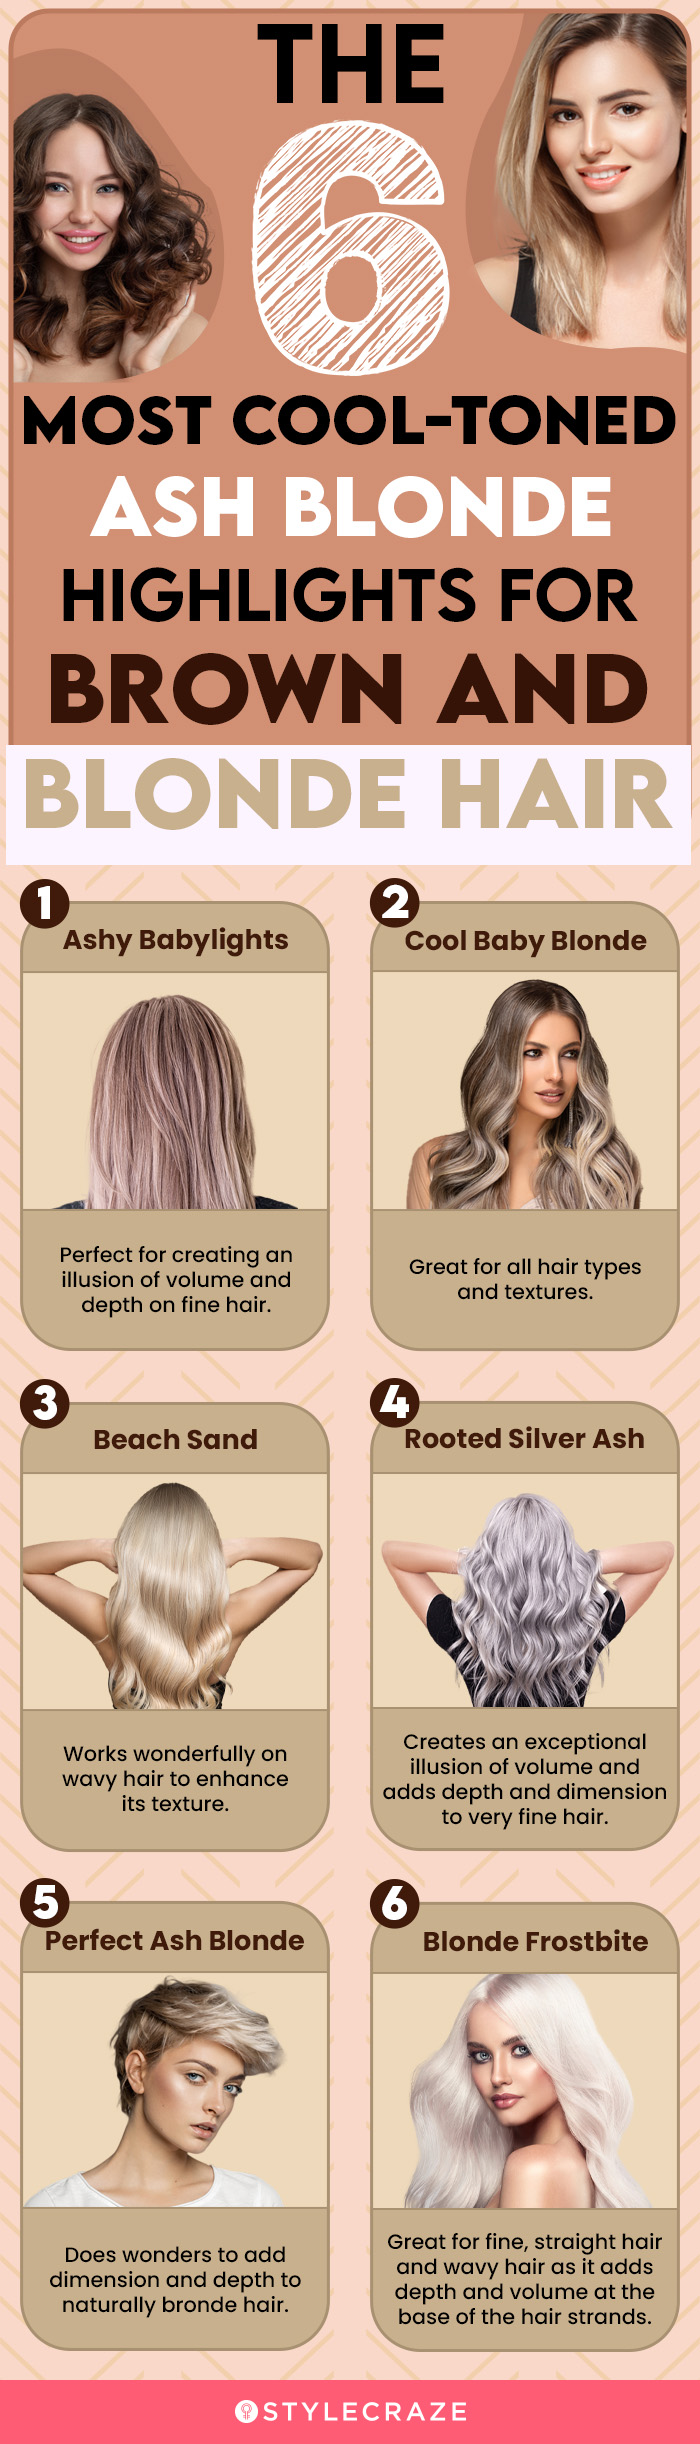 The 6 Most Cool-Toned Ash Blonde Highlights For Brown And Blonde Hair [infographic]